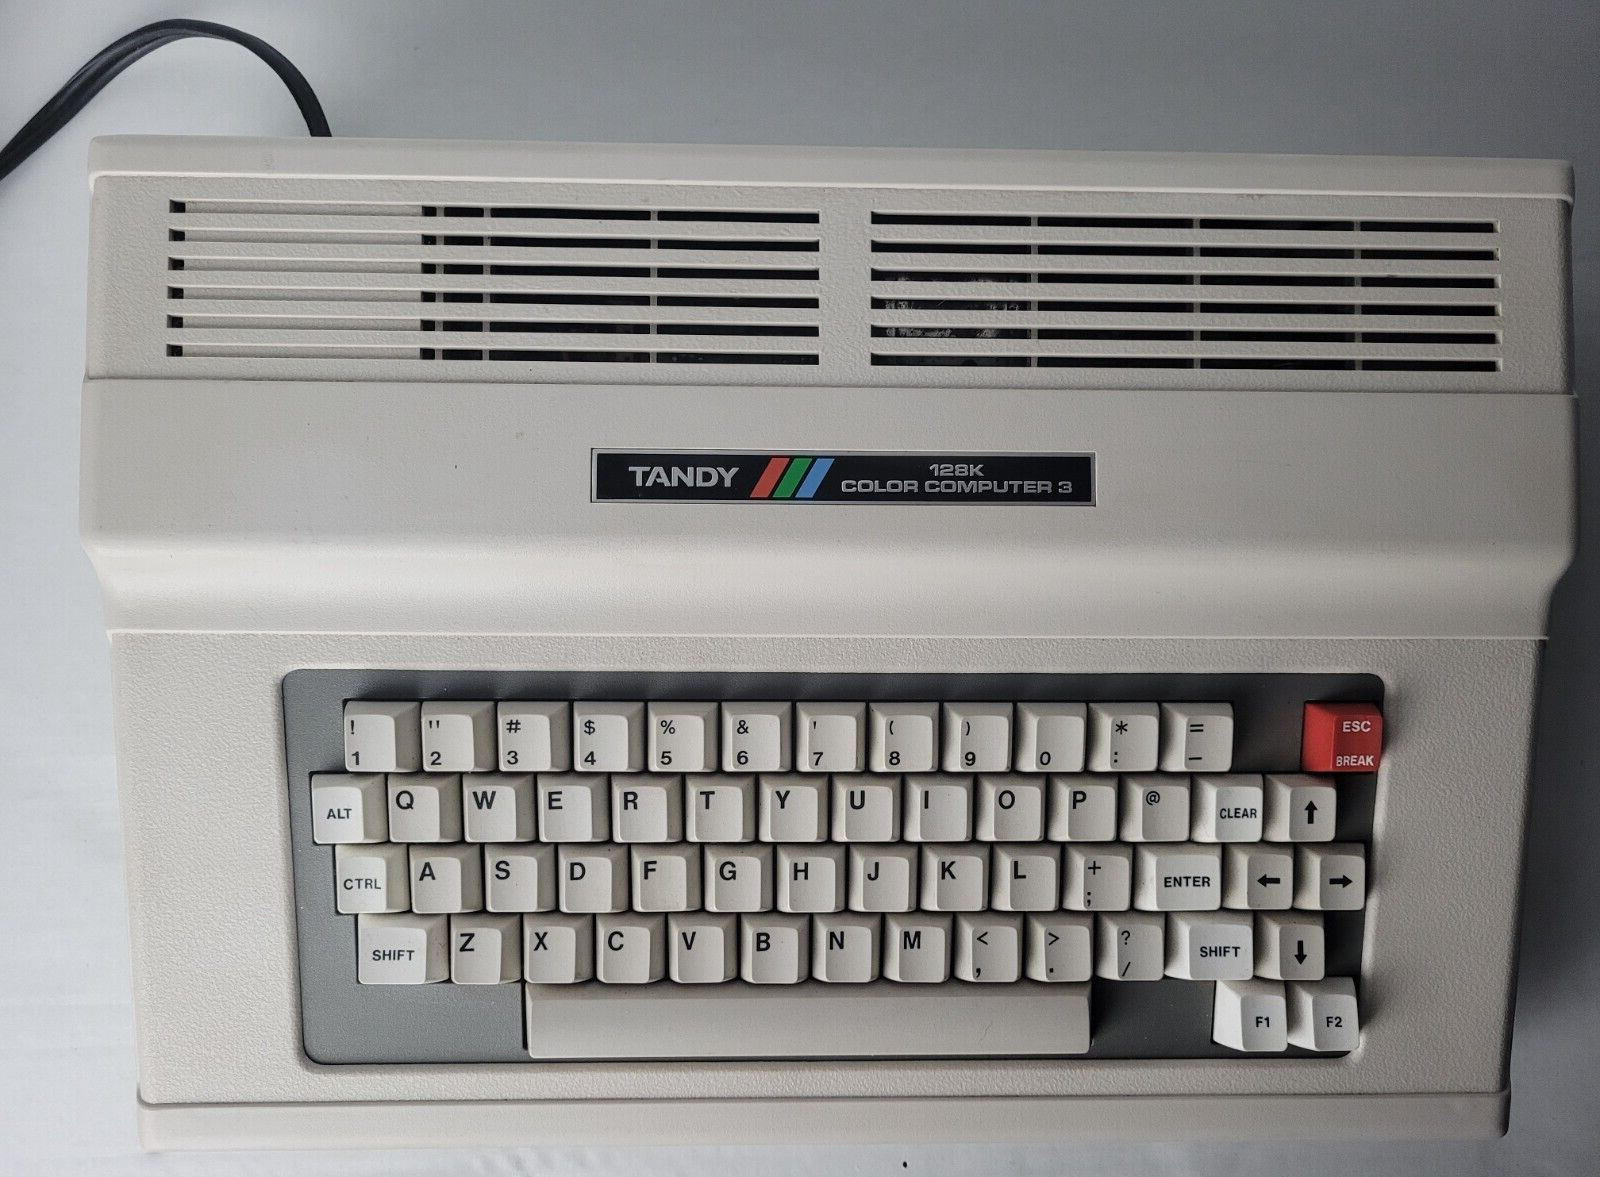 Vintage Tandy 128K Coco 3 Color Computer 3 26-3334 + 2 games Tested & Works